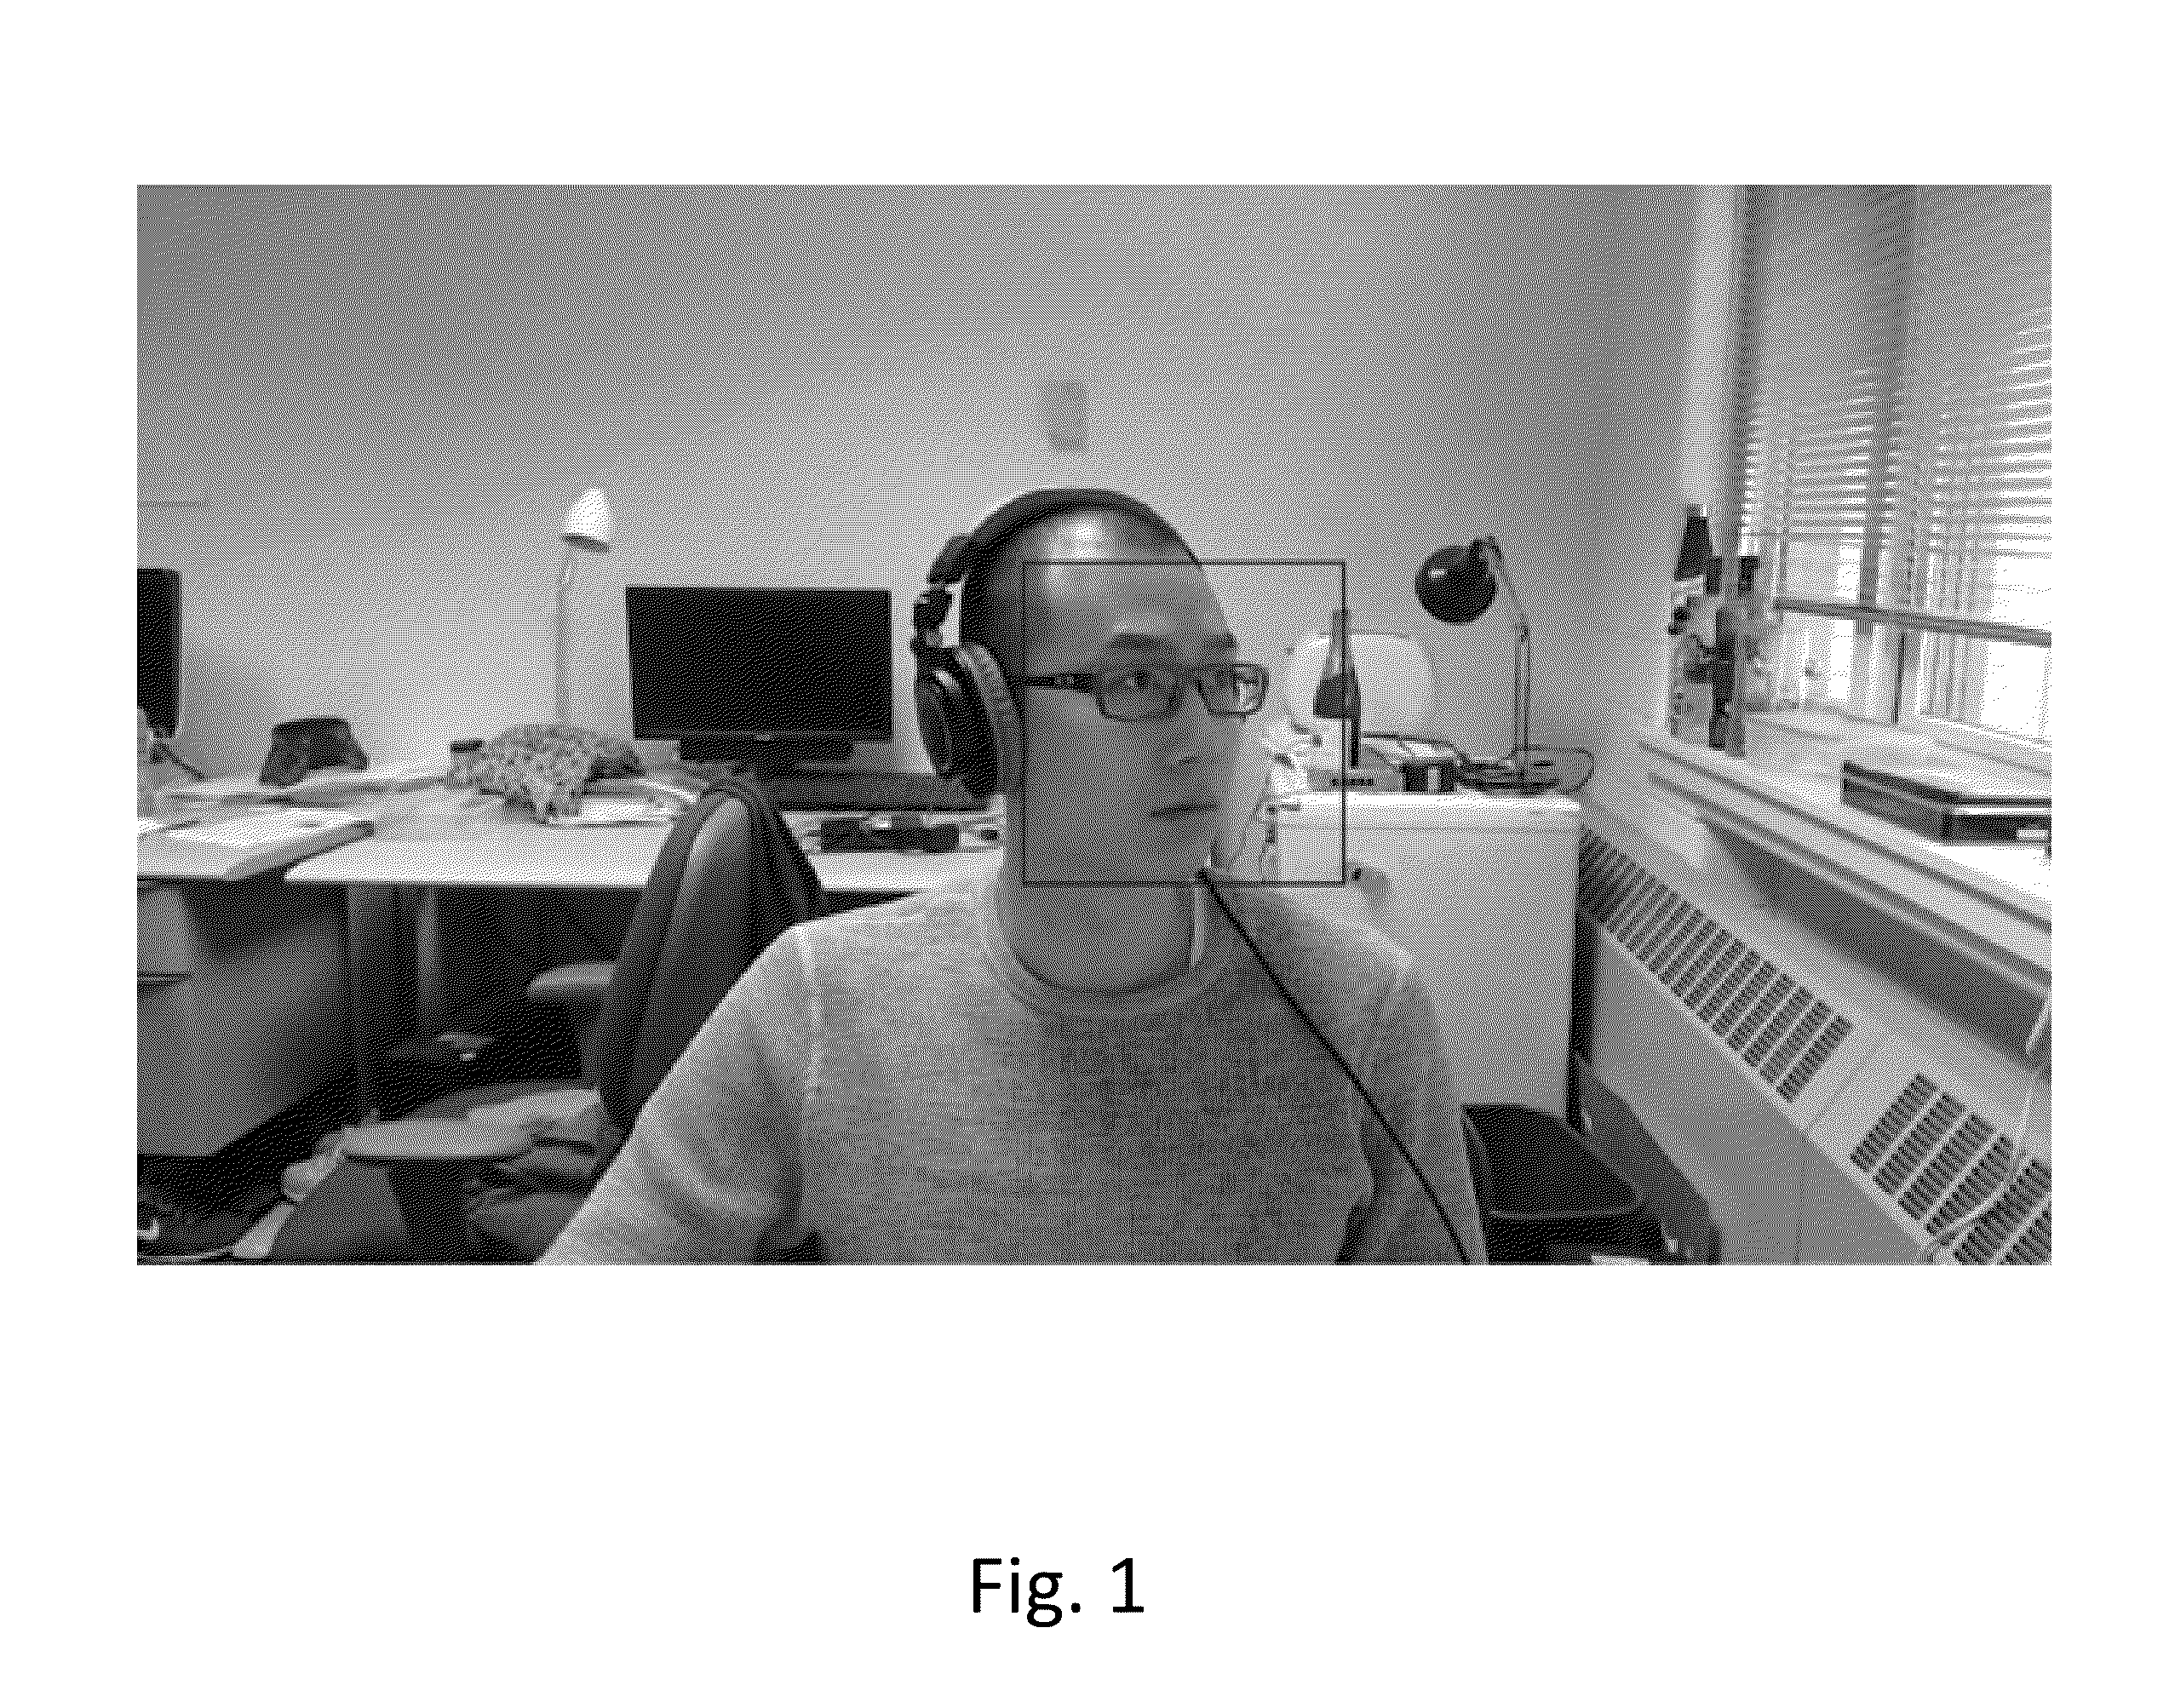 System and Method for Detecting and Tracking Facial Features In Images